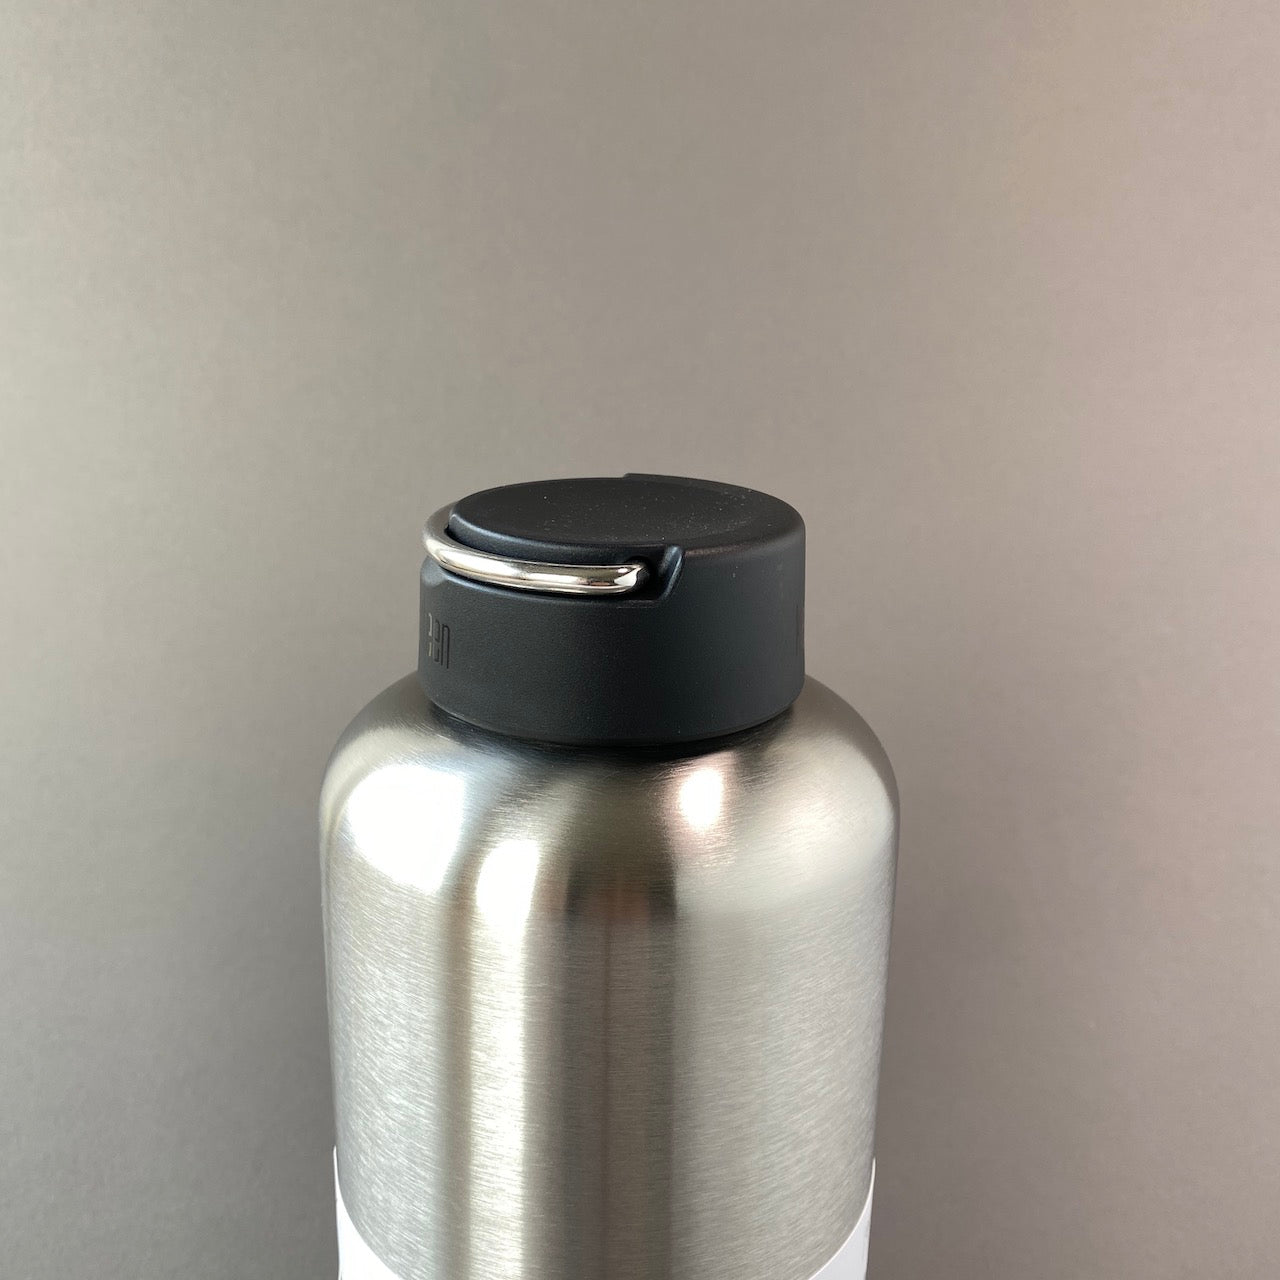 Detail photo of stainless steel 1900ml water bottle showing lid detail